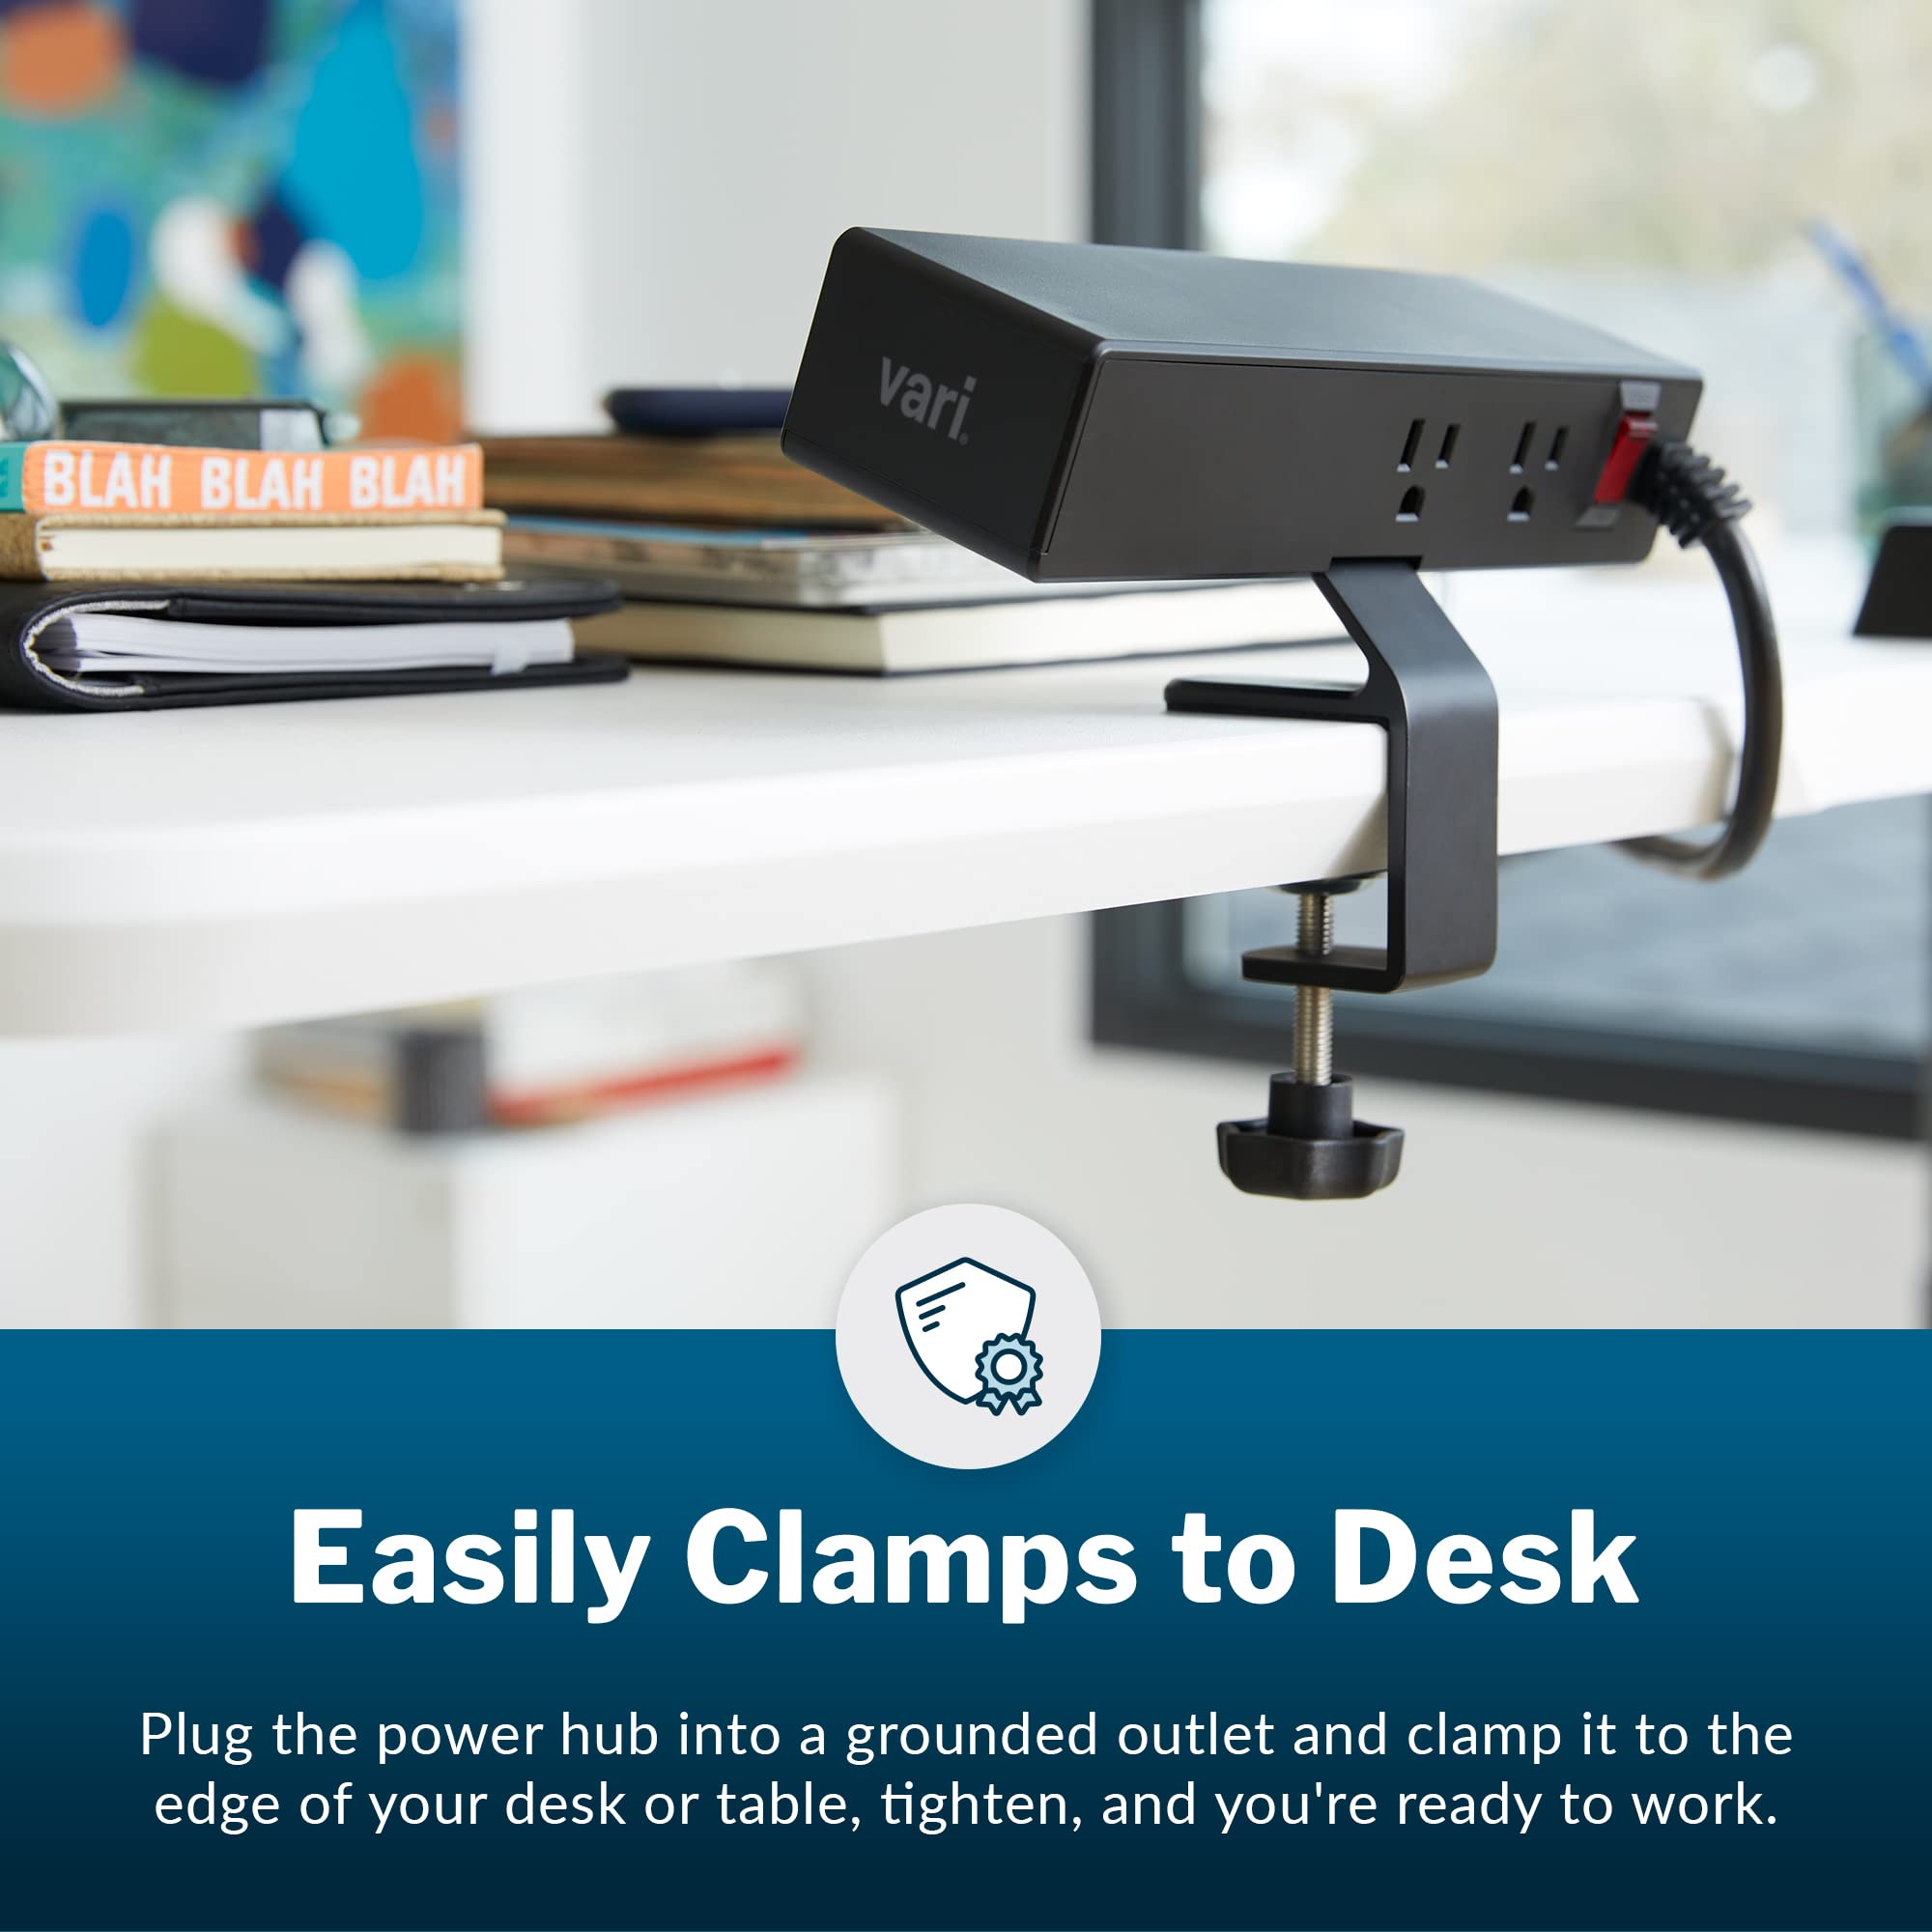 Vari Power Hub - Black Multiple Outlet Power Charging Station with Desk Mount - 5 AC outlets, 2 USB Ports, 12" Cord - Fast Charging for Work or Home Office - Easy to Install with No Tools Needed